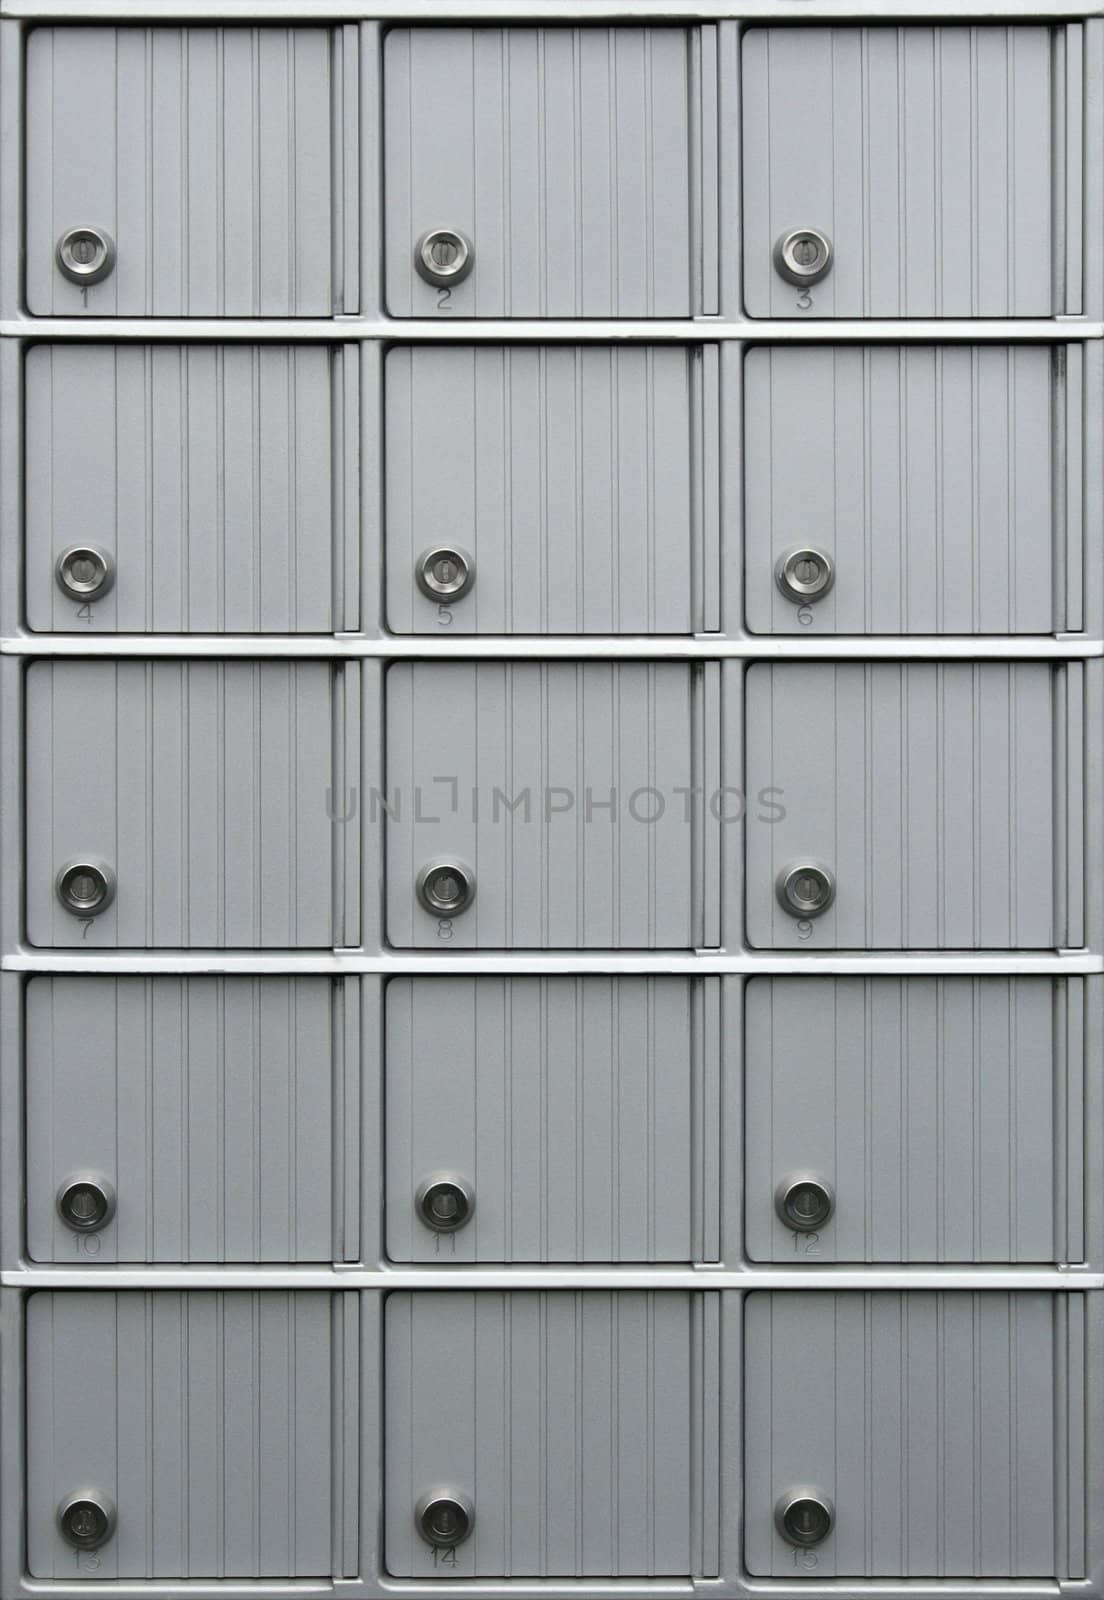 Rows of mailboxes by anikasalsera